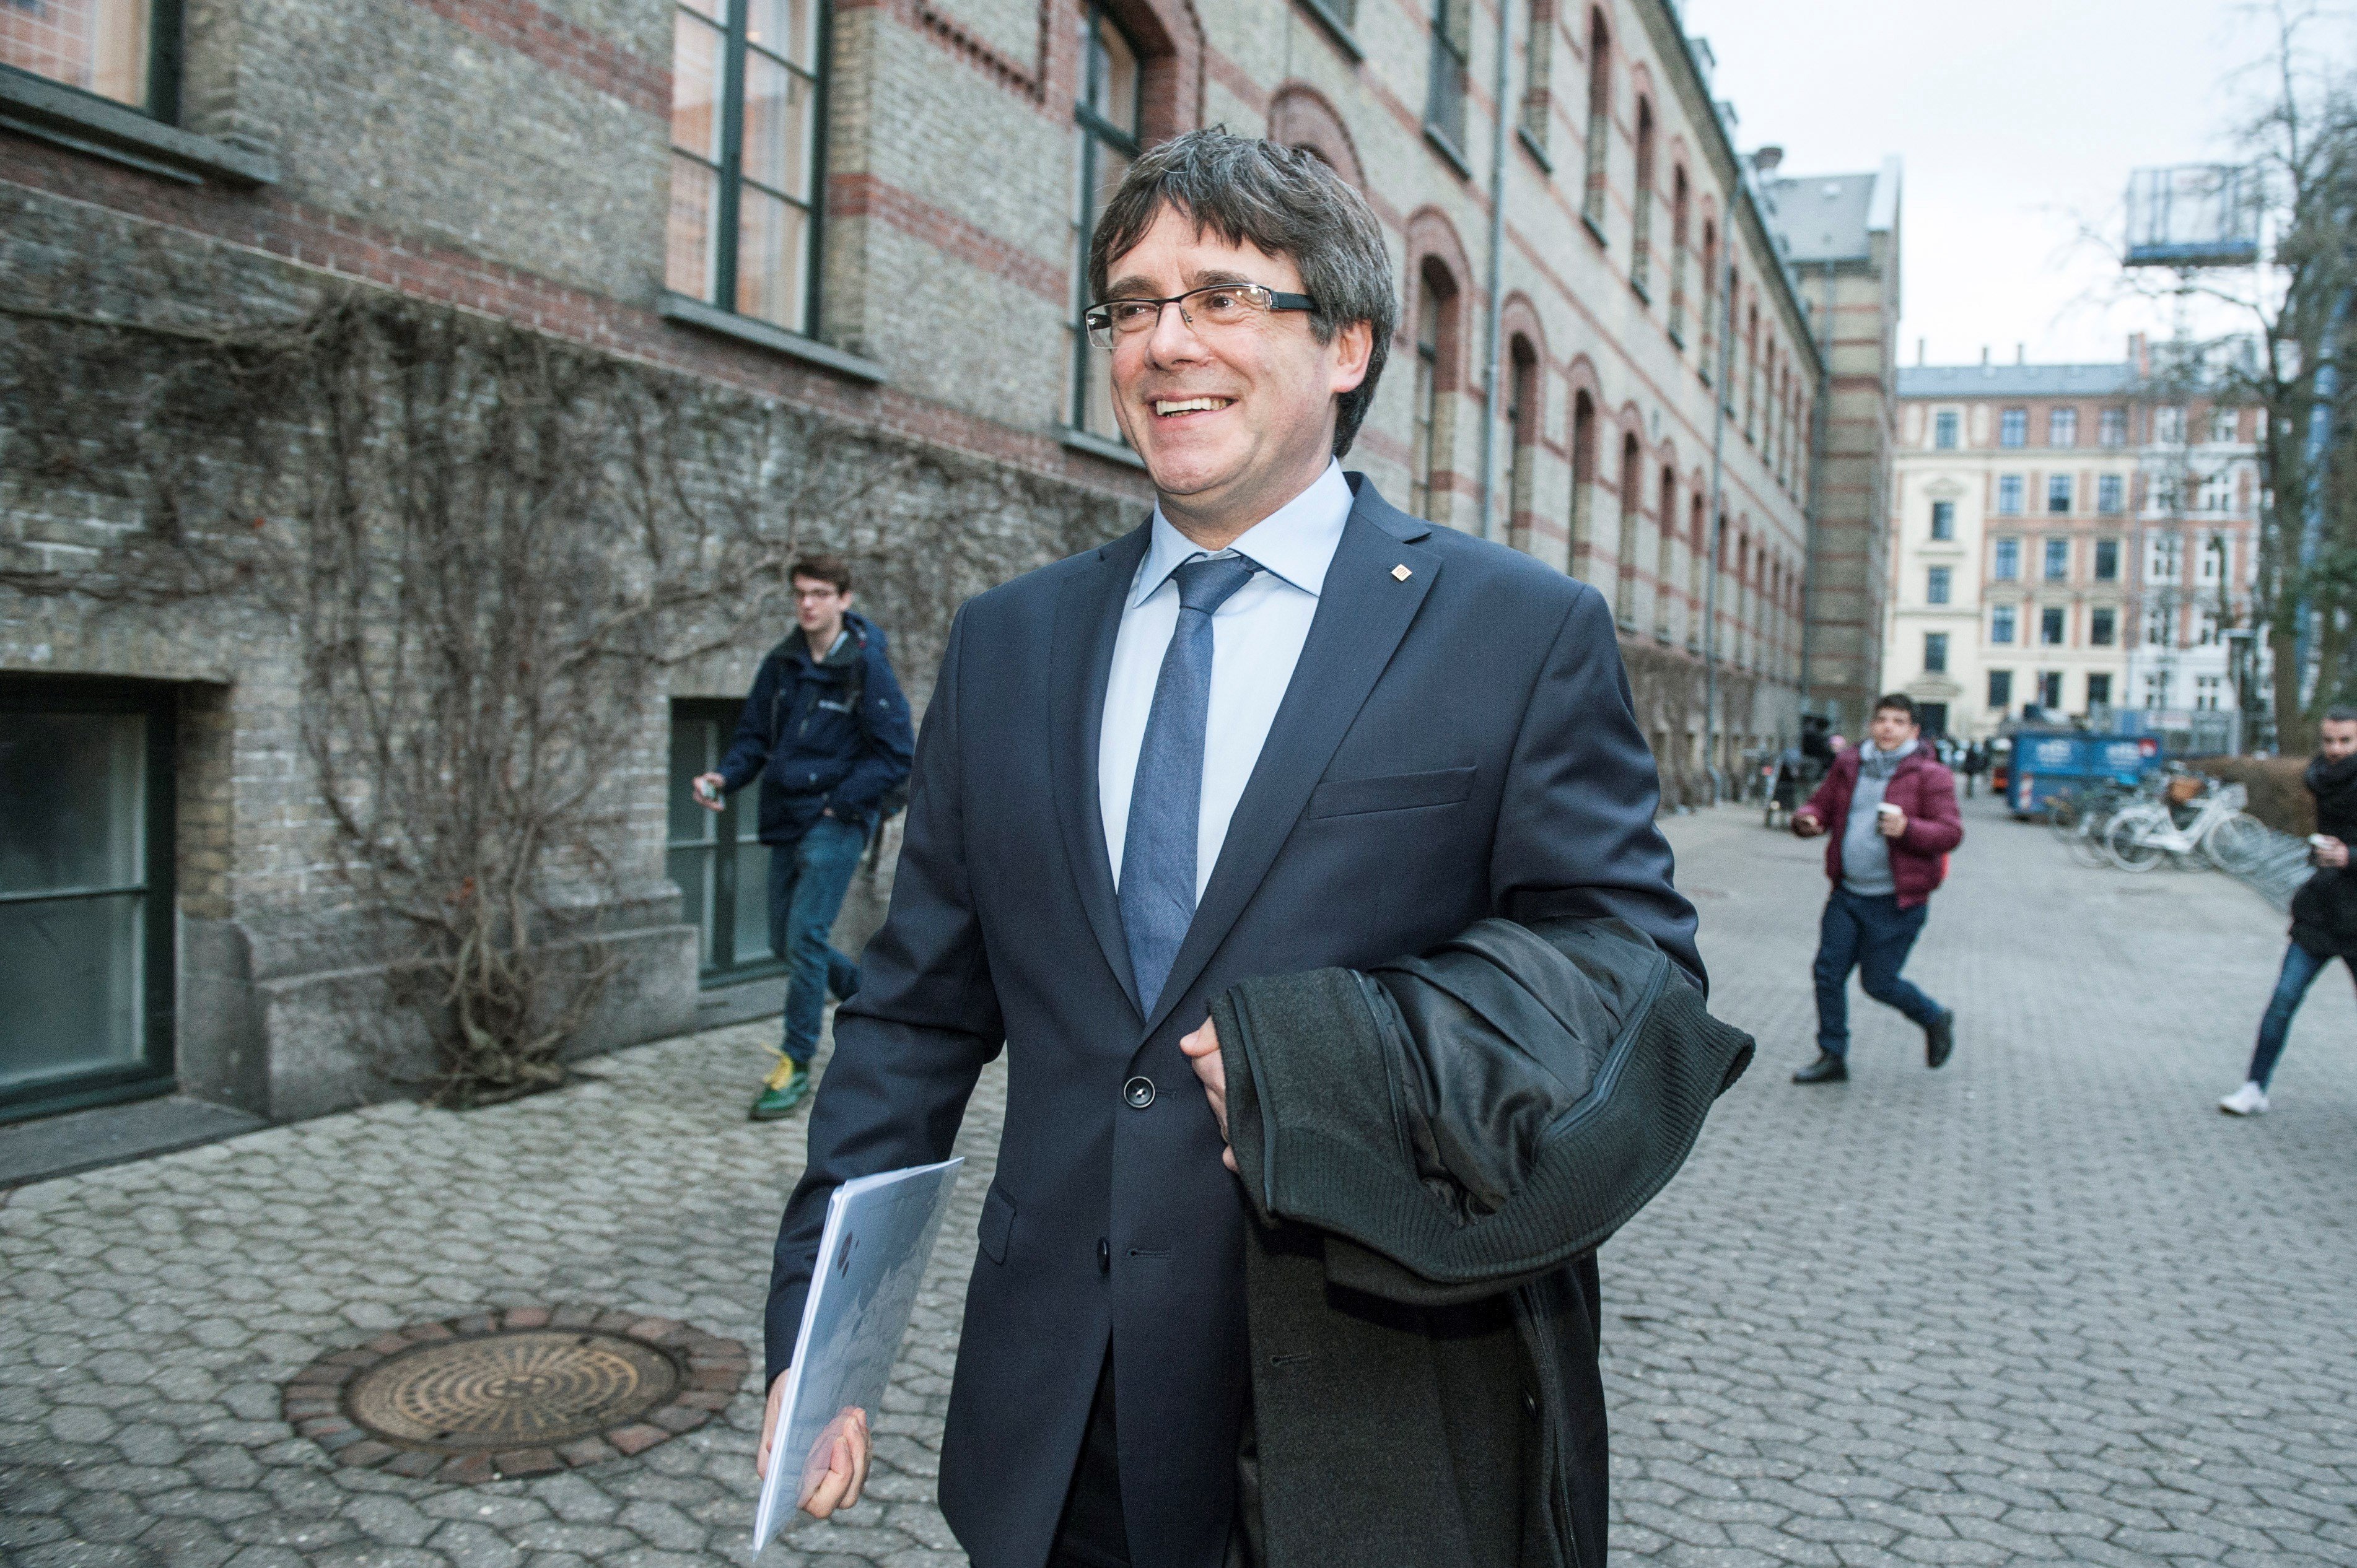 The responsibilities president Puigdemont will have